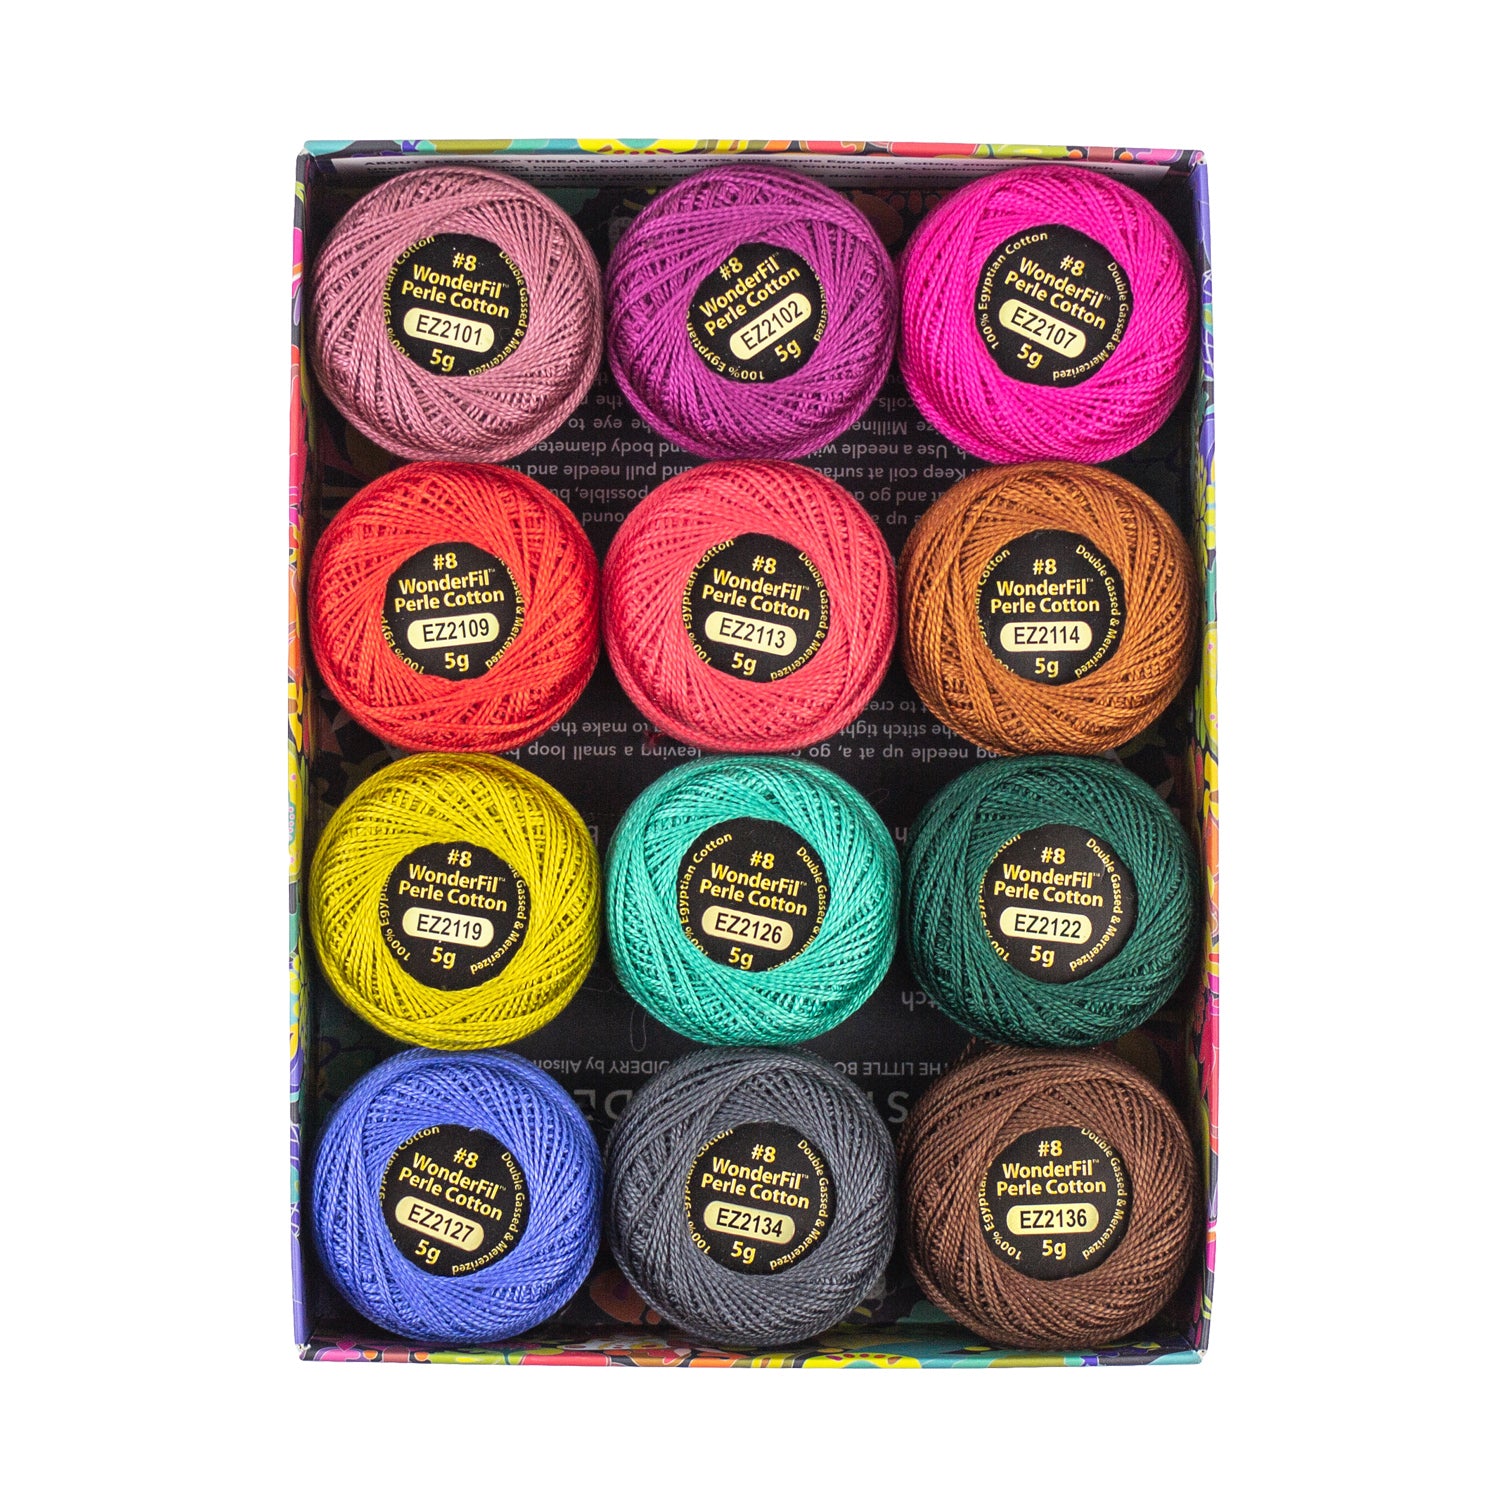  Rhapsody Pearl Cotton Thread Size 8 Crochet Thread Perle 12  Balls Set Hand Knitting, Embroidery, Sashiko, Cross-Stitch, Sewing,  Needlepoint, DIY, Quilting (Set Morning Glory) : Arts, Crafts & Sewing